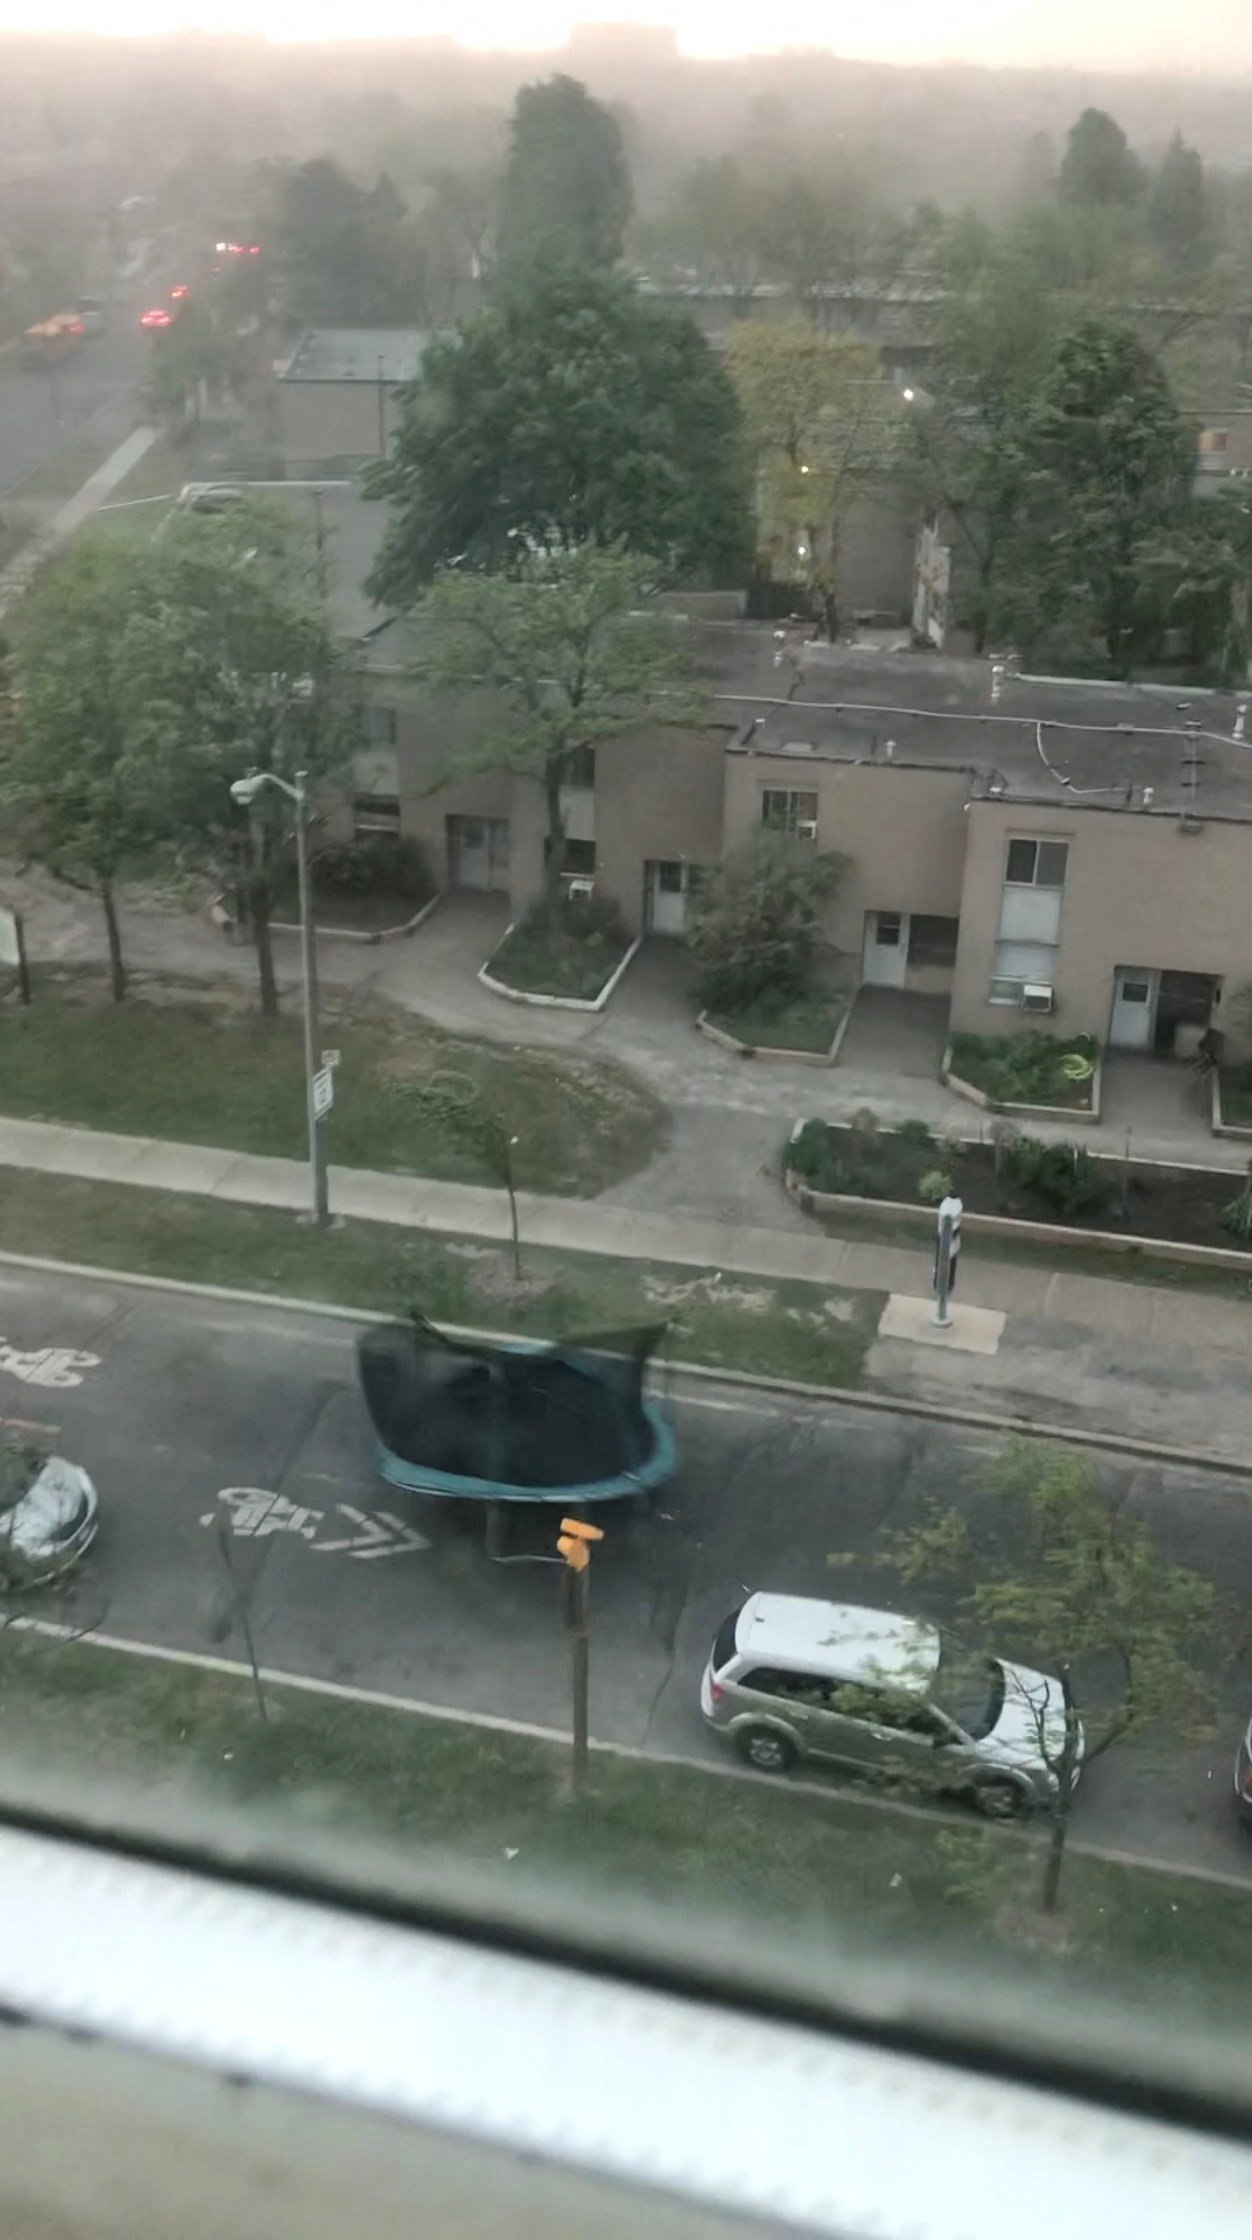 A trampoline is blown down a street during a storm in Toronto